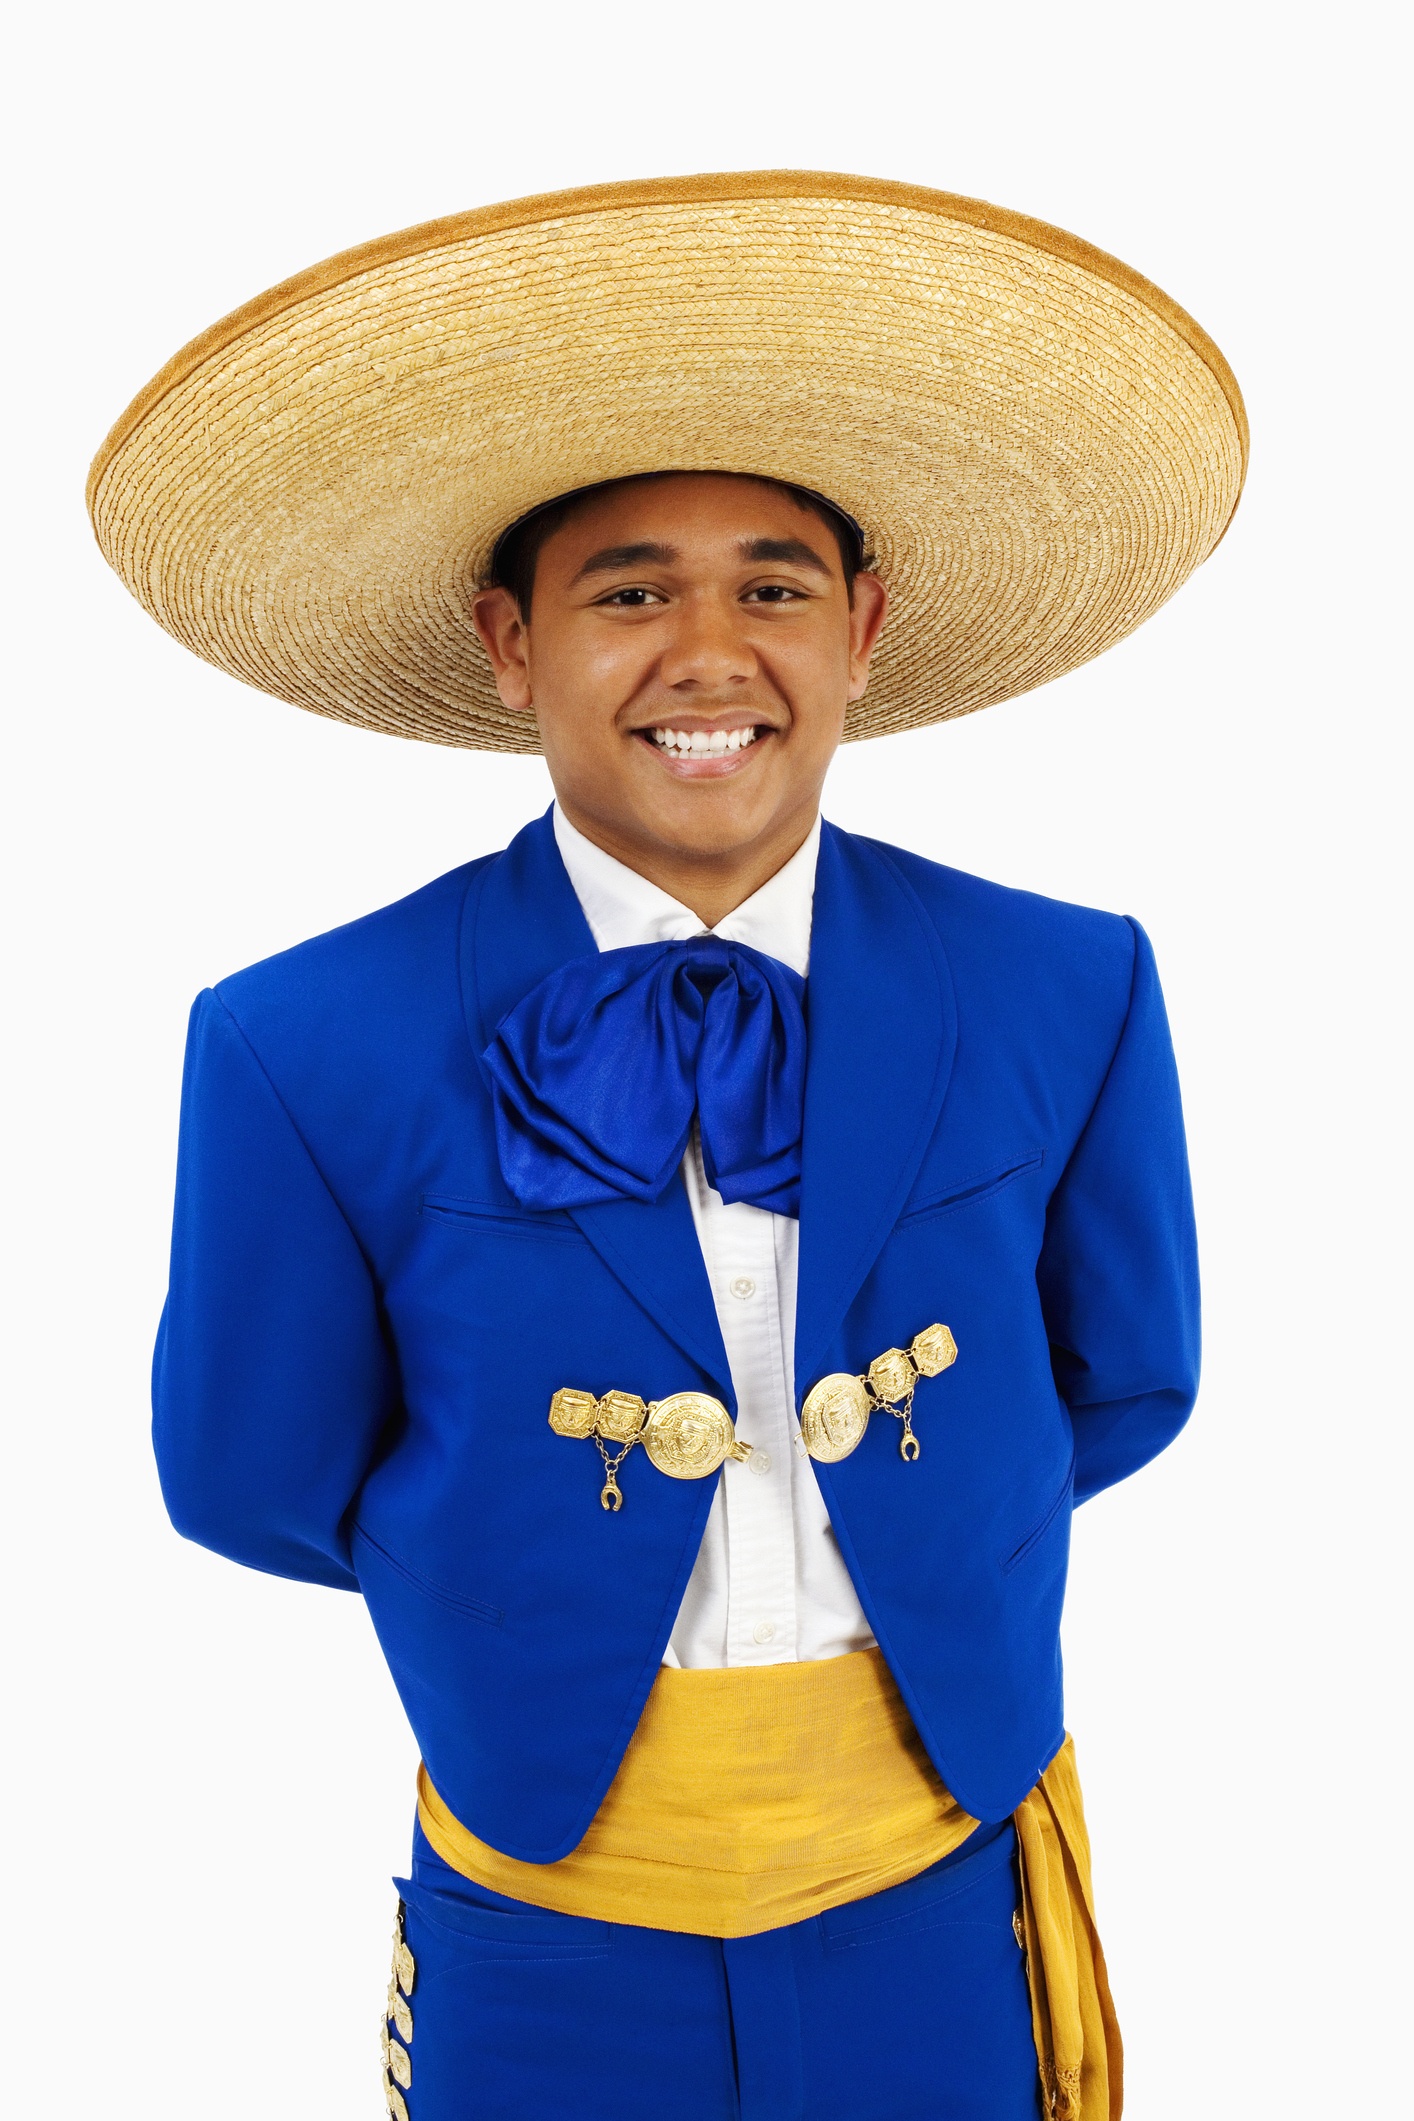 Young man in sombrero with hands behind back, portrait